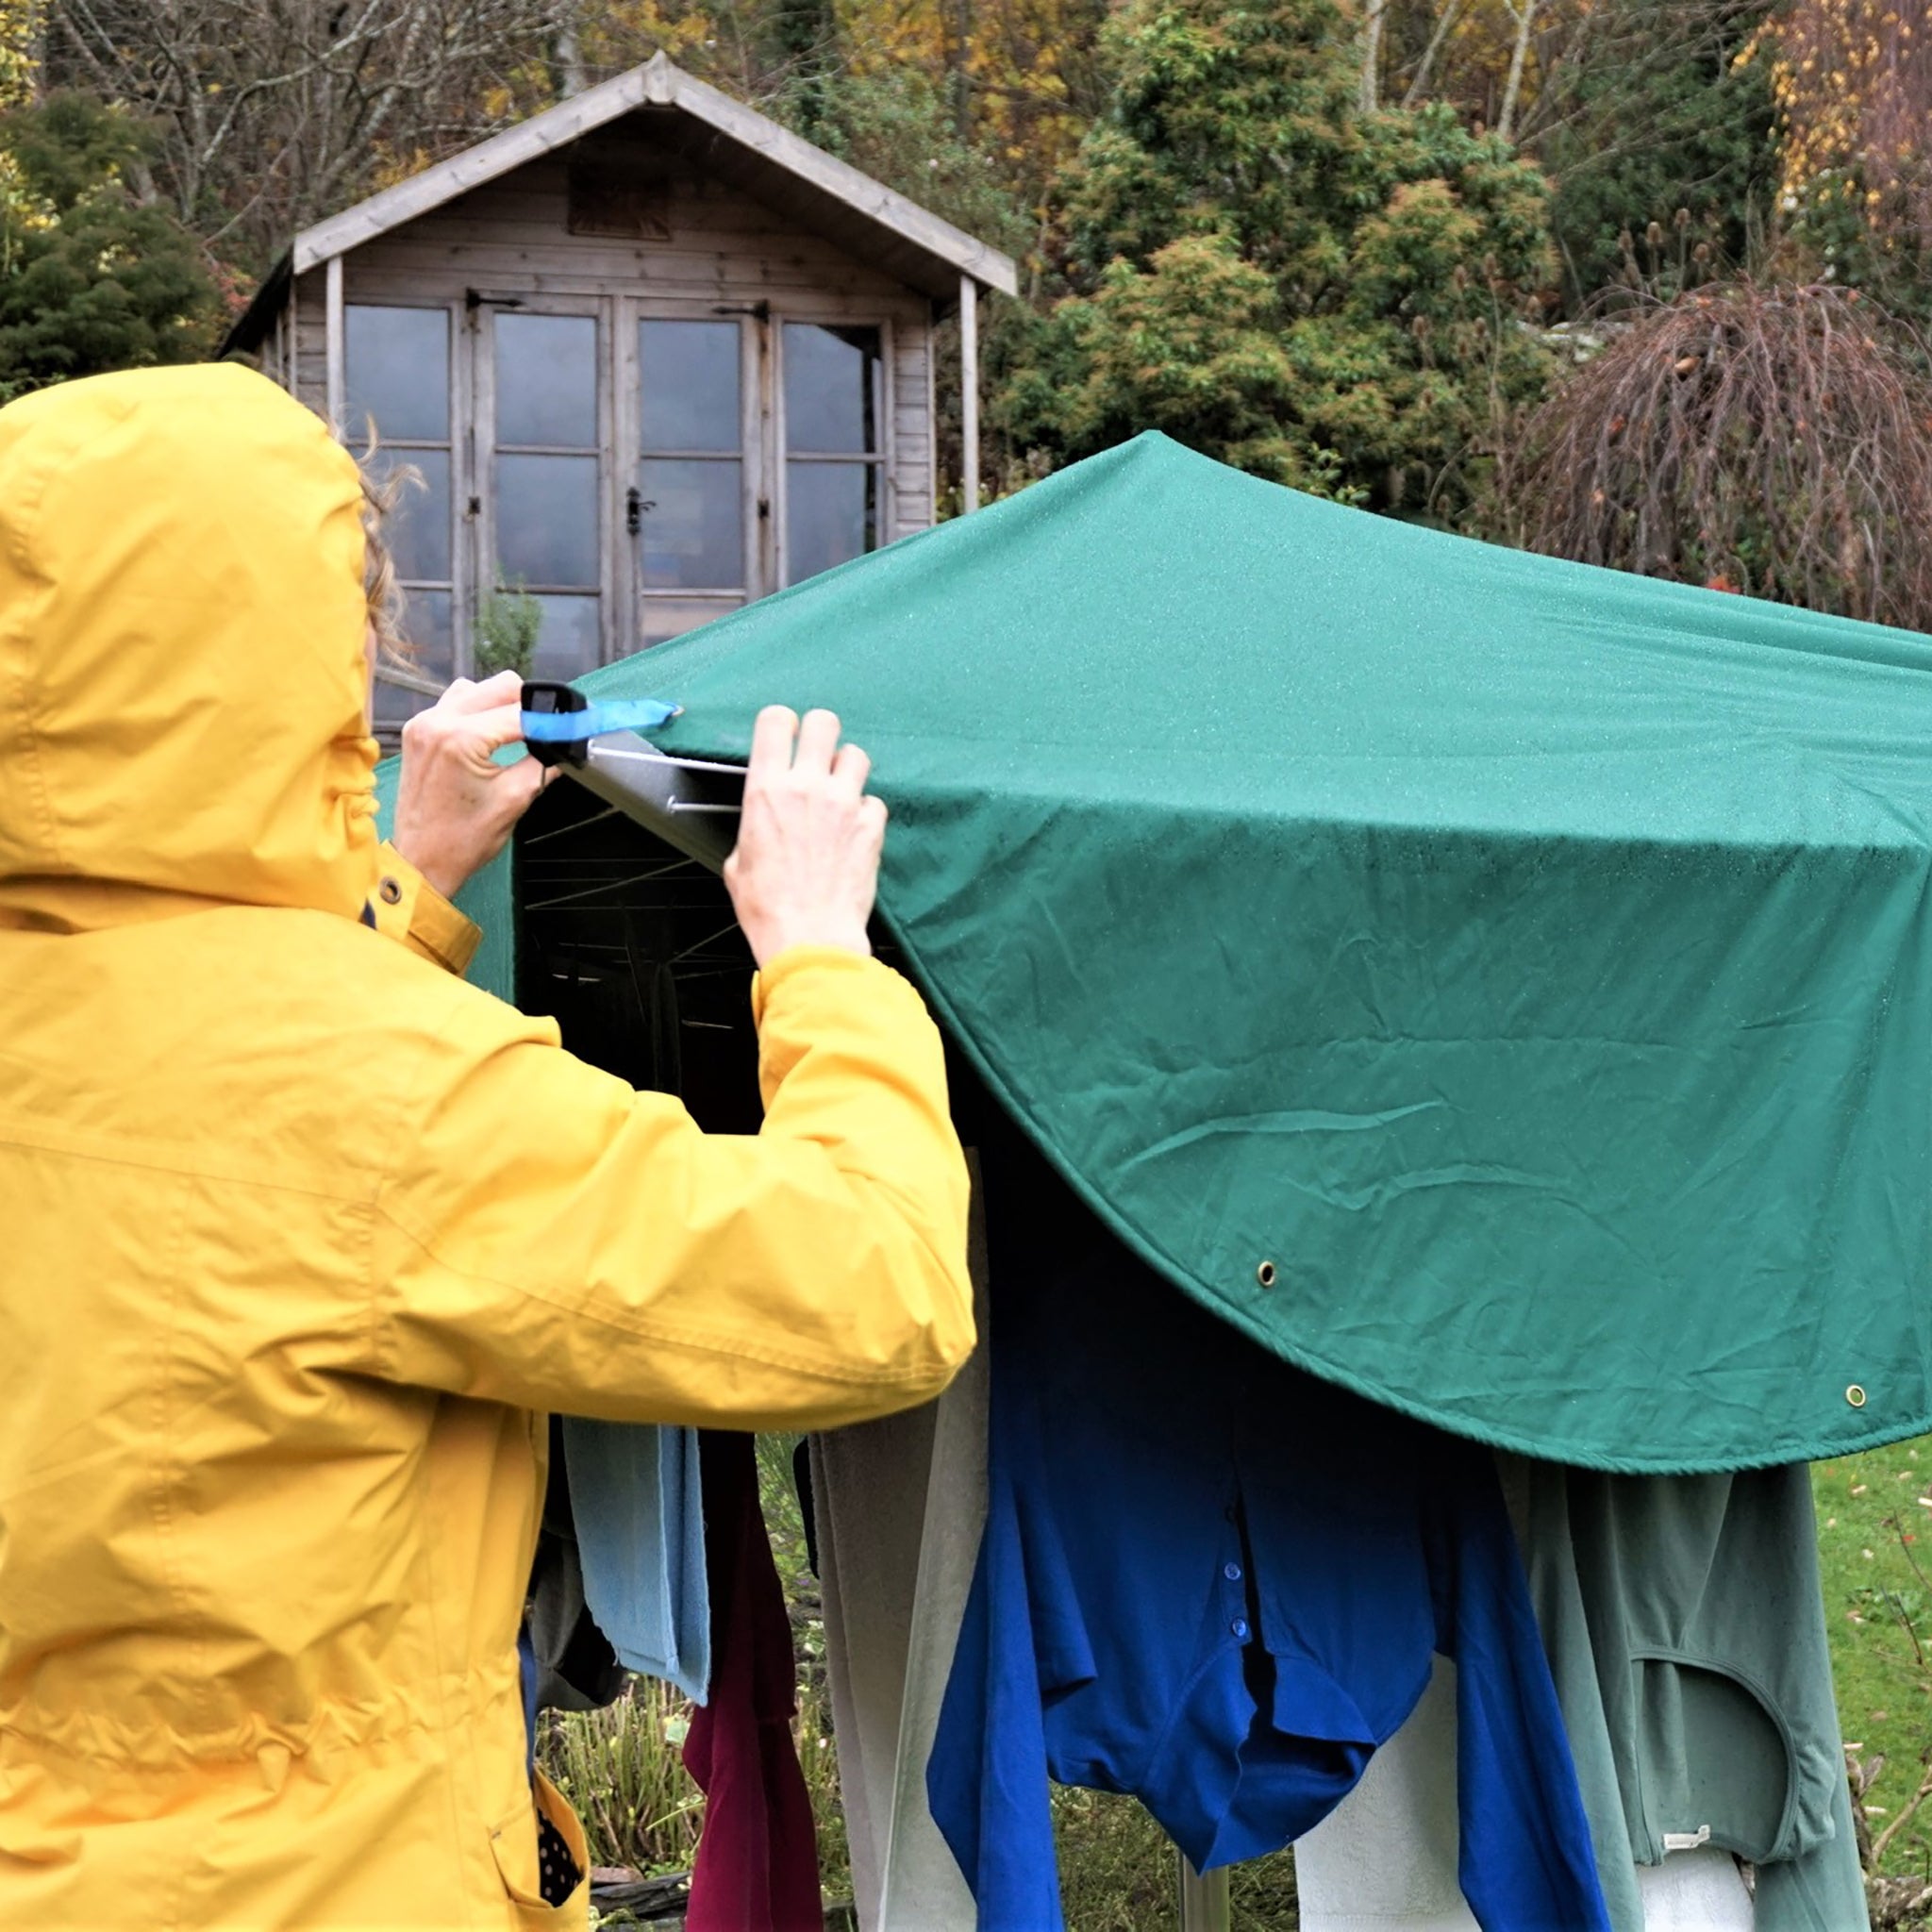 A woman wearing a yellow raincoat hangs laundry on a rotary dryer then covers it with a green Laundry Mac which protects the laundry from the rain